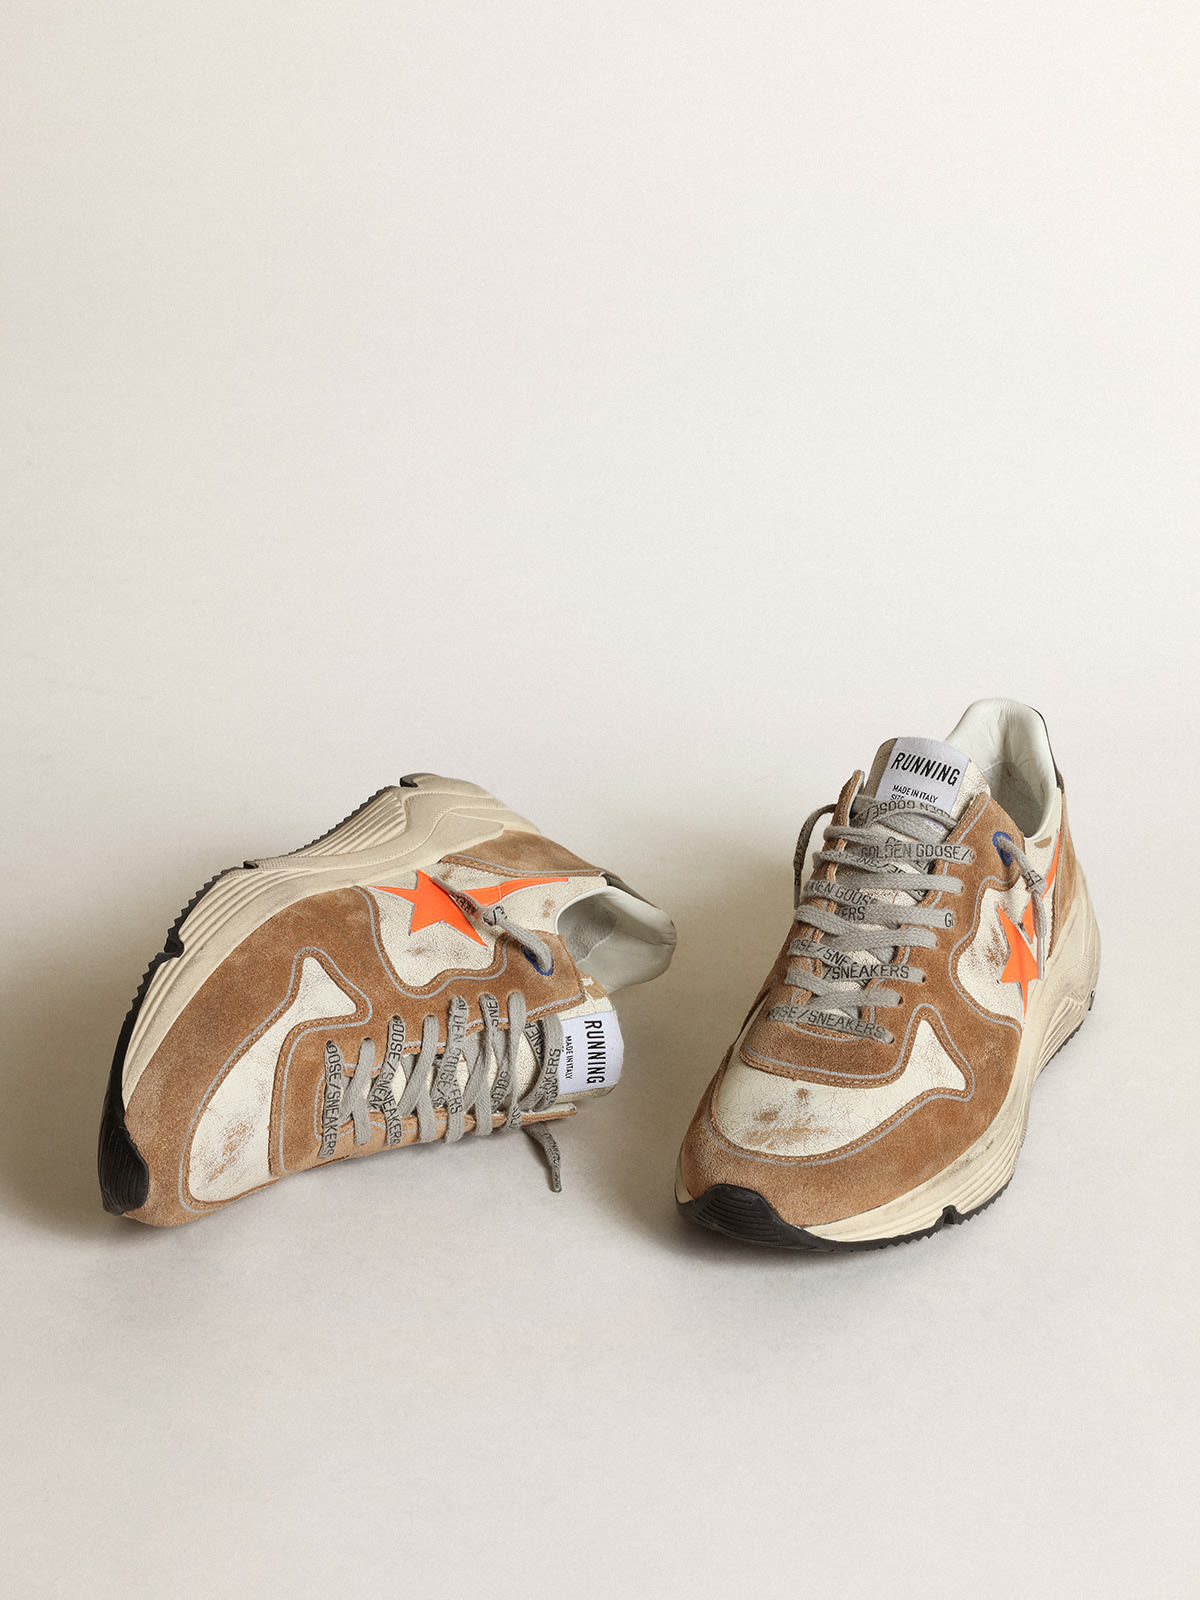 Golden Goose - Running Sole LTD sneakers in glossy white leather and tobacco-colored suede with fluorescent orange leather star in 